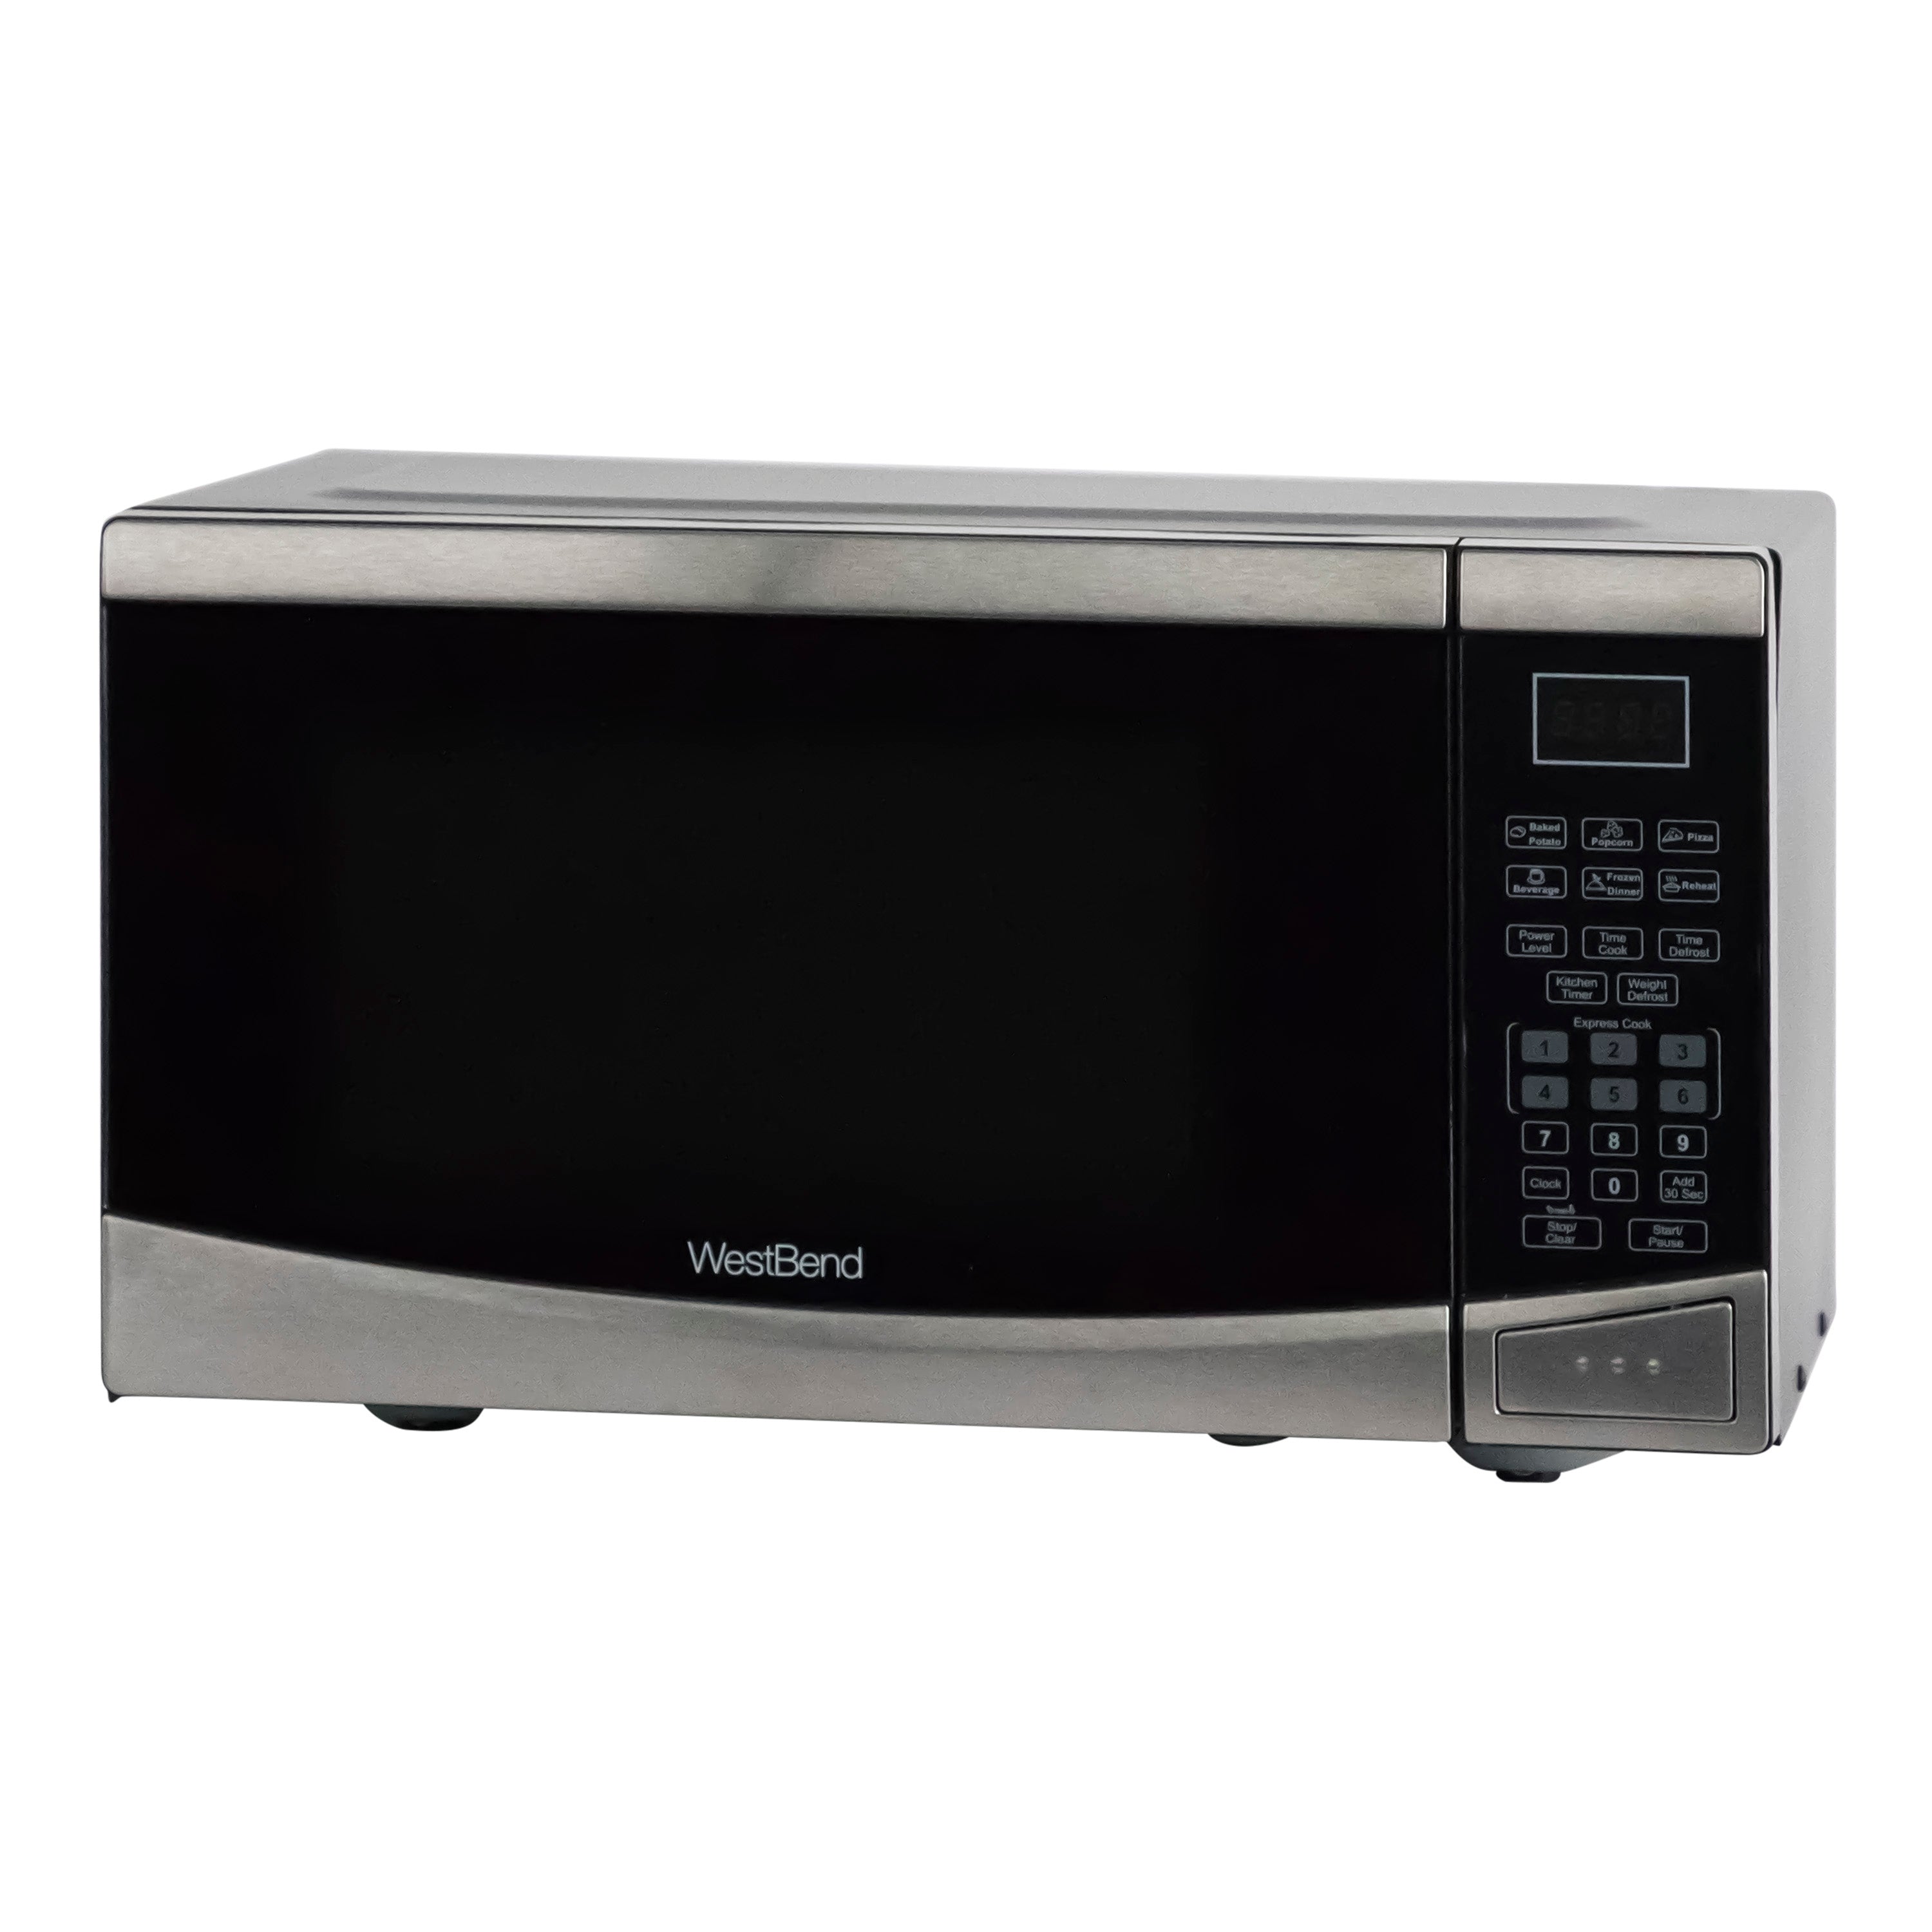 West Bend - WBMW92S, West Bend 0.9 cu. ft. Microwave Oven, in Stainless Steel